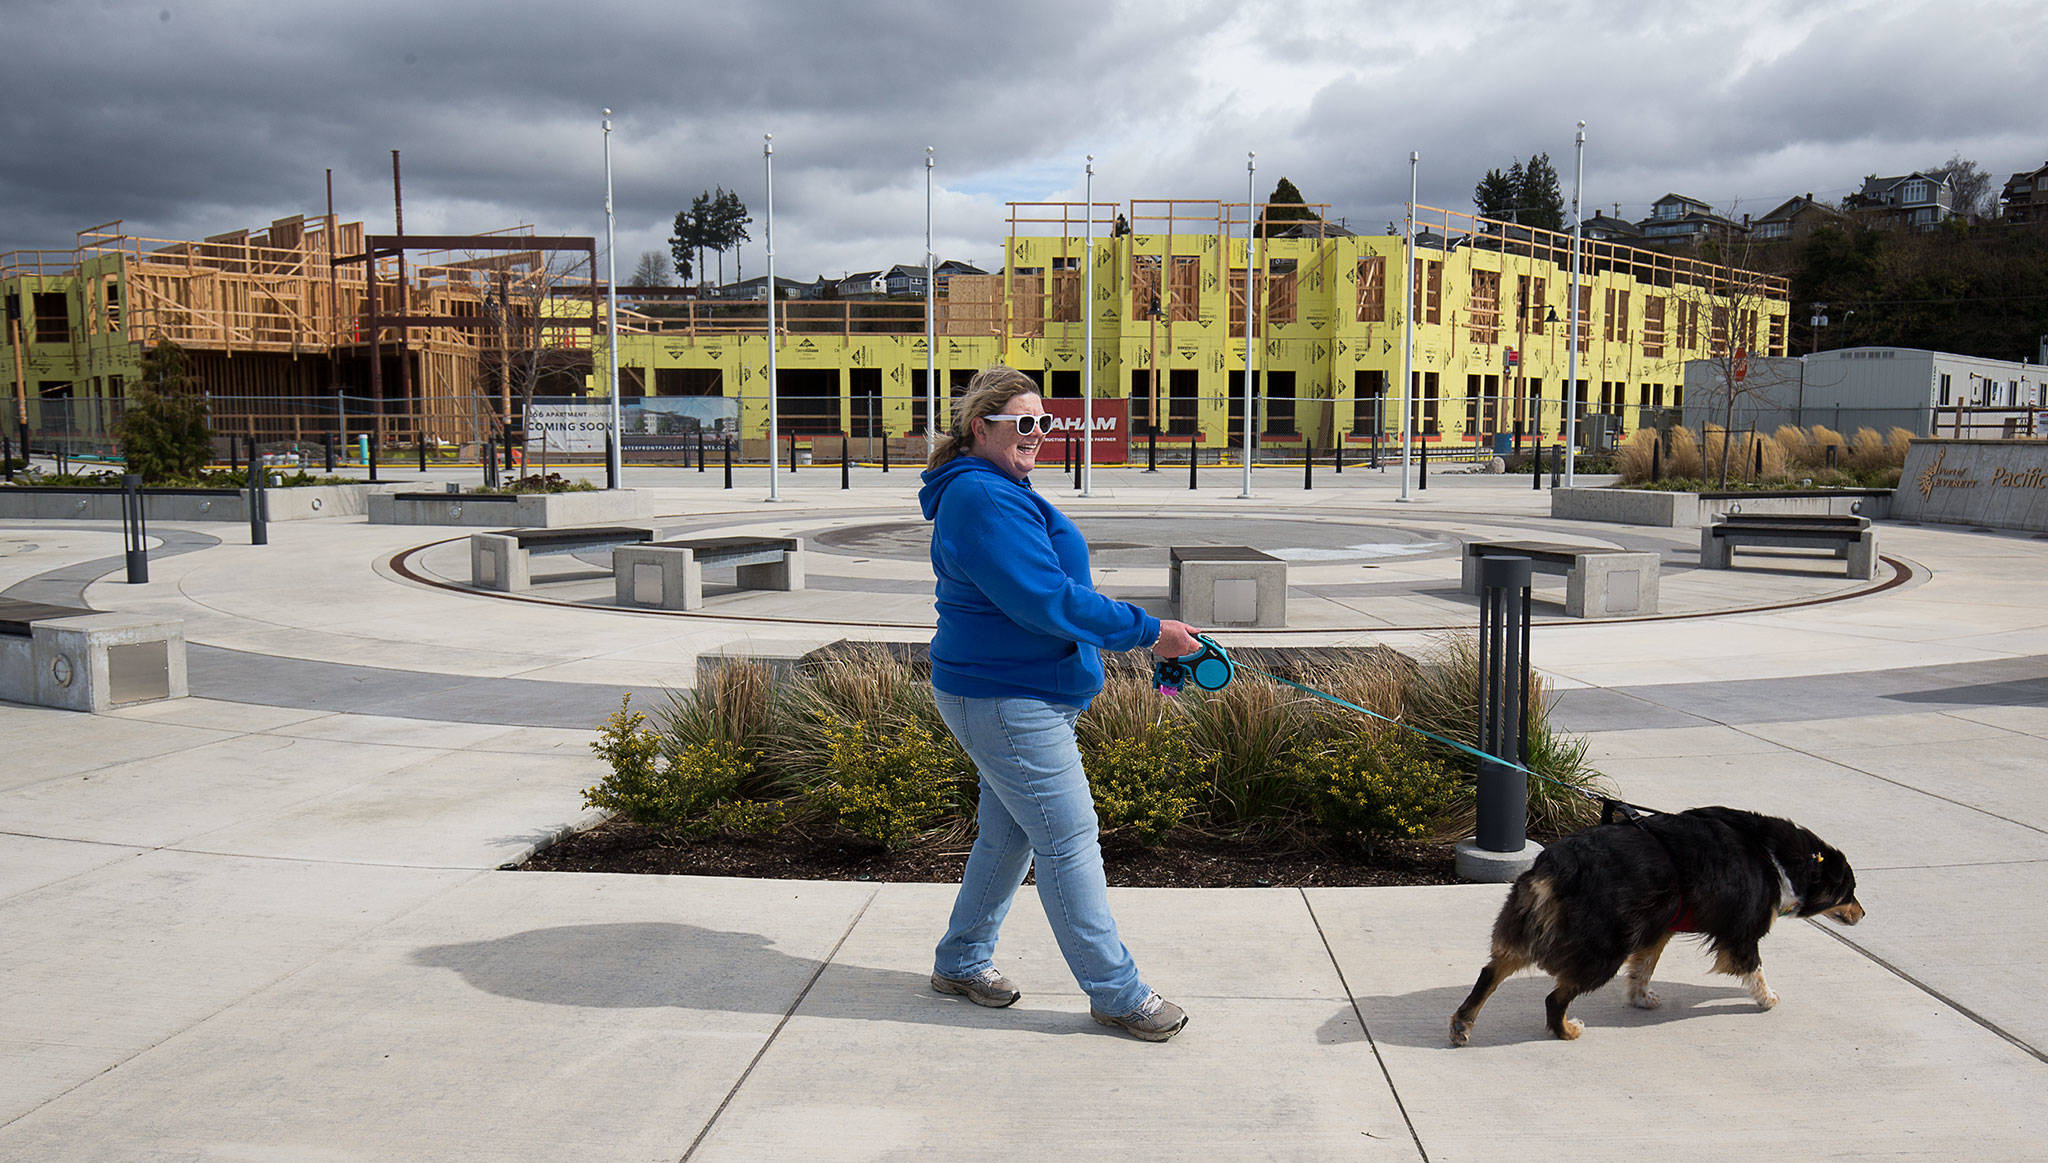 Amy Ulrich walks her dog, Kahlua, by the Waterfront Place Apartments at the Port of Everett on Monday. Gov. Jay Inslee ordered most construction projects around the state to shut down for two weeks. That paused work at several big housing projects, including this one at the port. (Andy Bronson/The Herald)